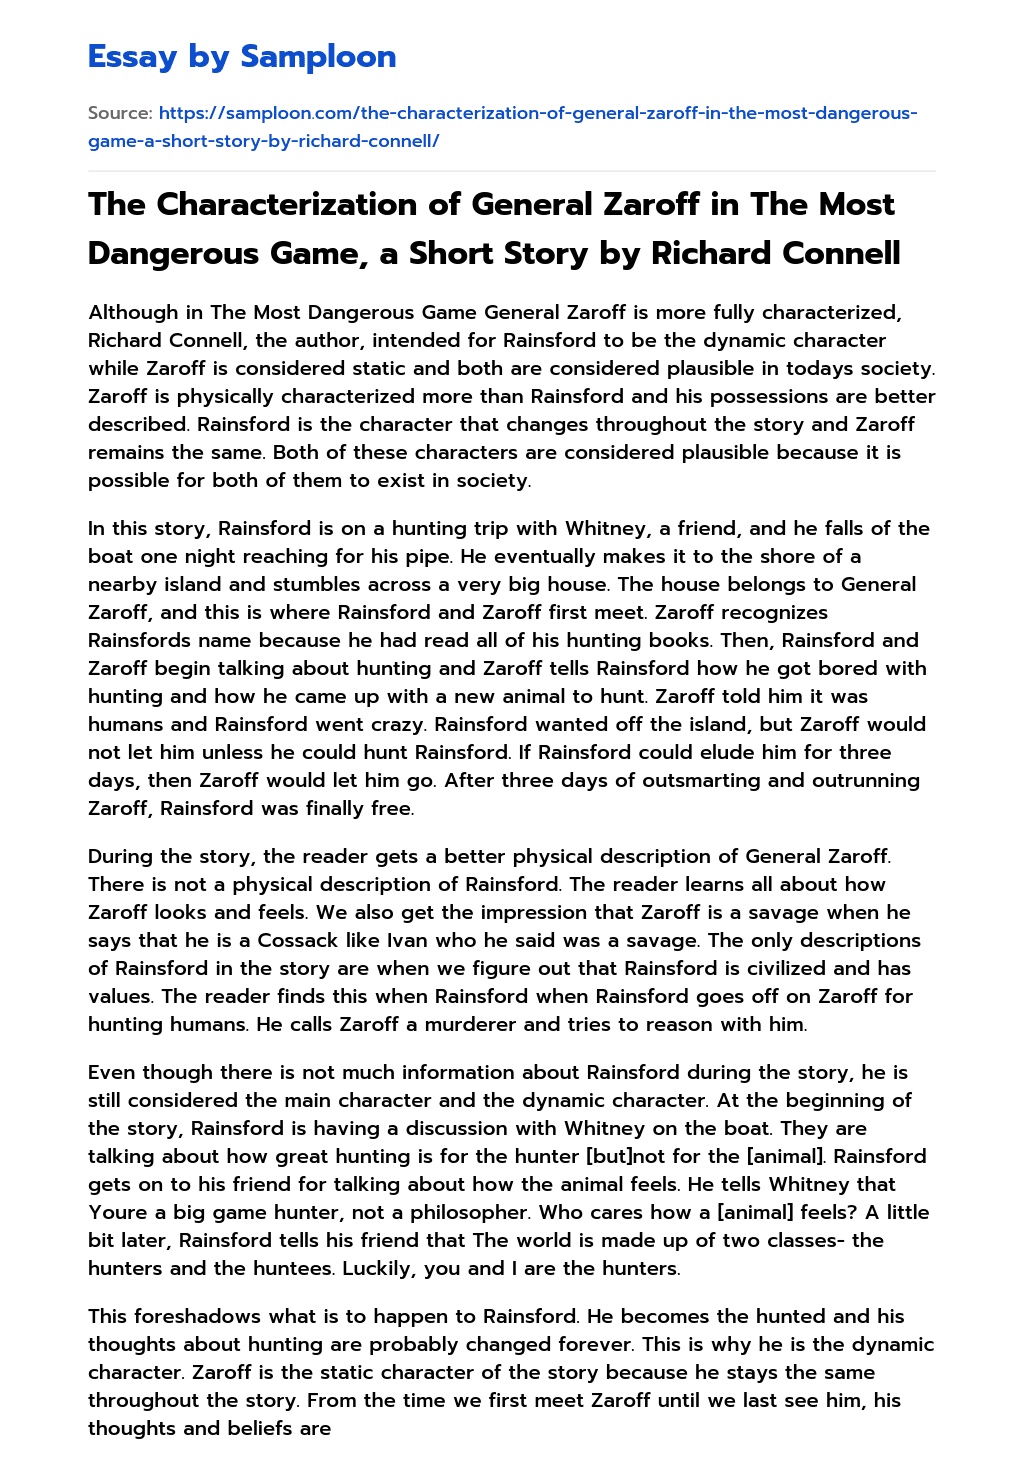 The Characterization of General Zaroff in The Most Dangerous Game, a Short Story by Richard Connell essay